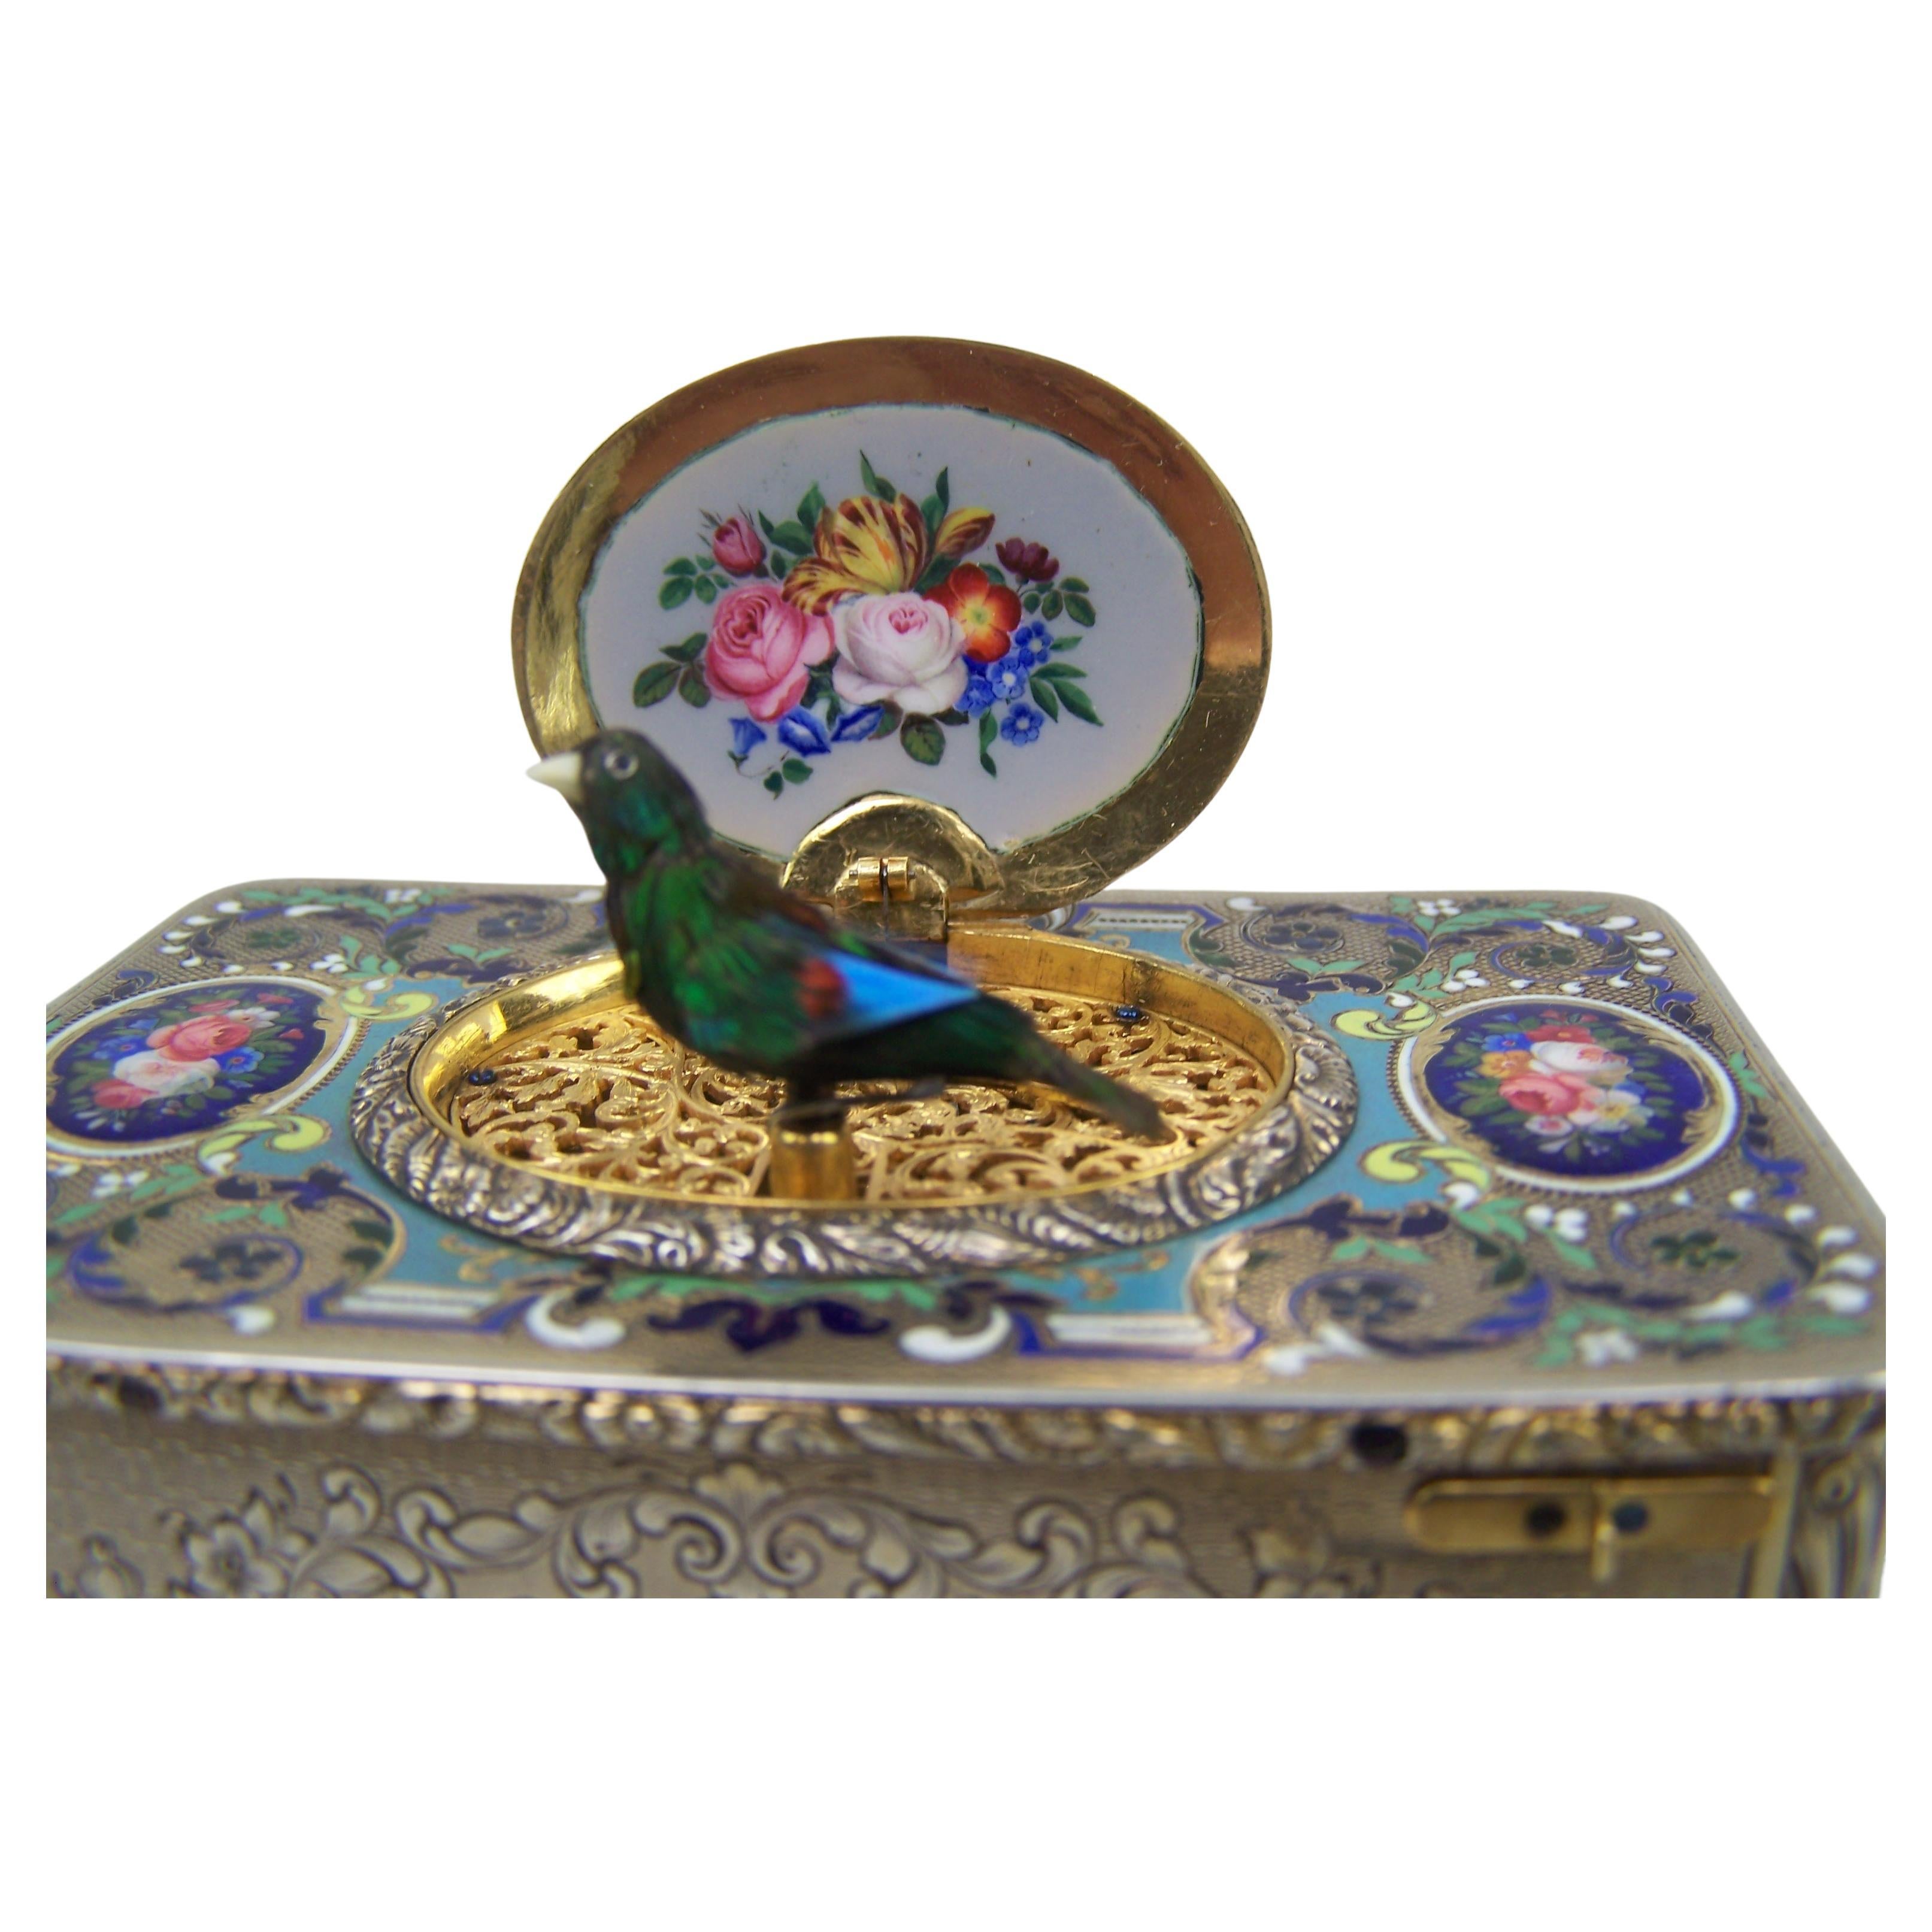 Singing bird box by Bruguier in silver case with enamel to top and lid For Sale